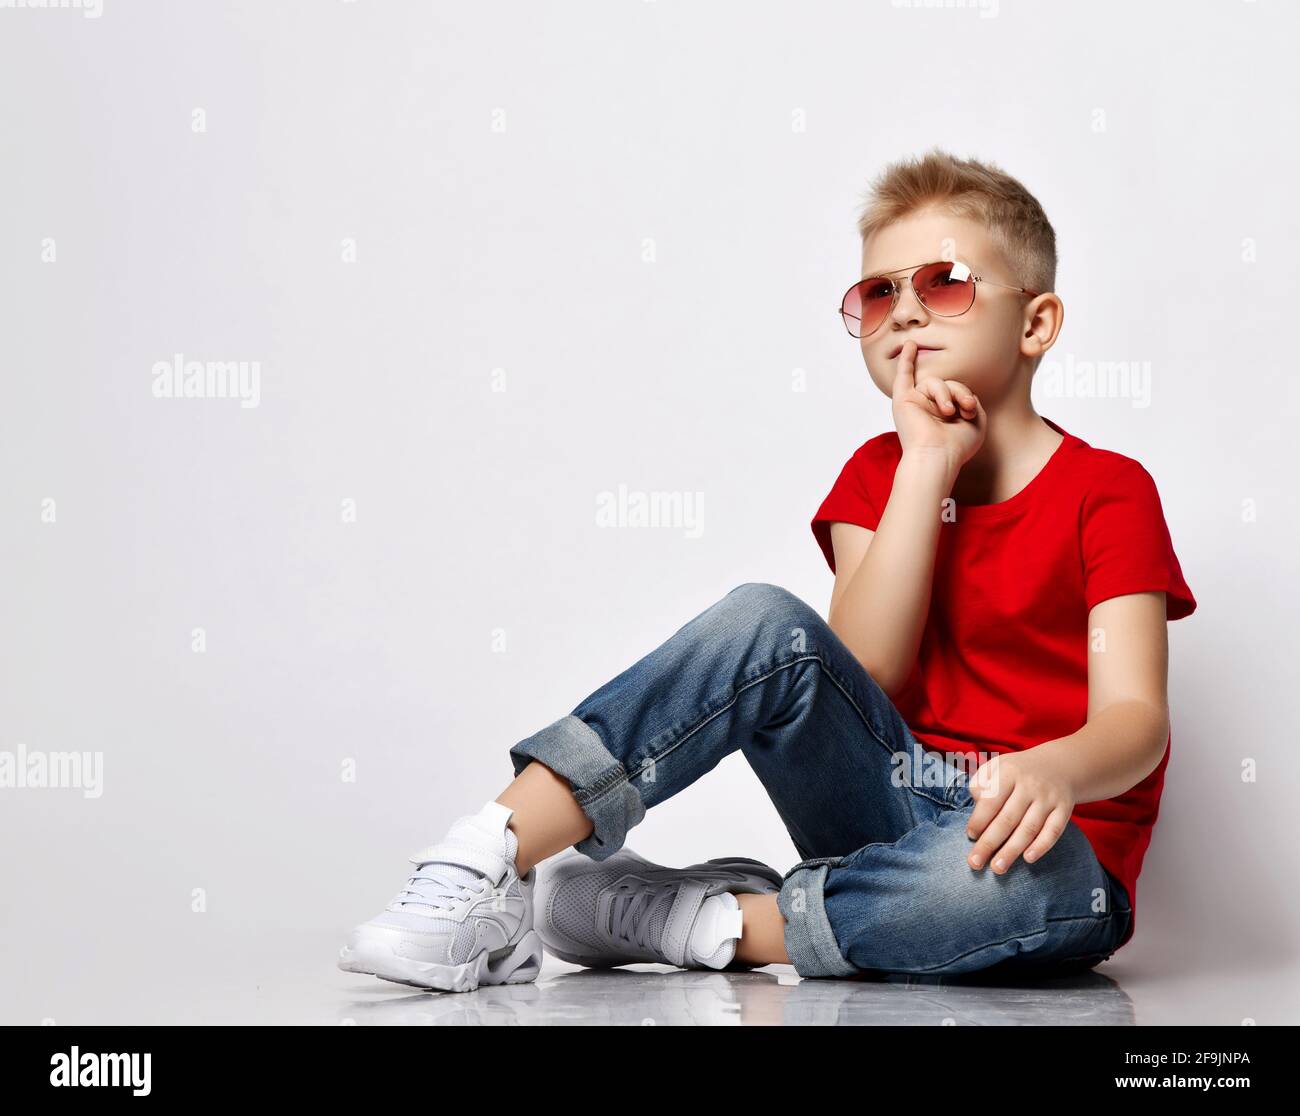 Stylish blonde kid boy leader in red t-shirt, blue jeans, white sneakers and sunglasses sits on floor thoughtful Stock Photo